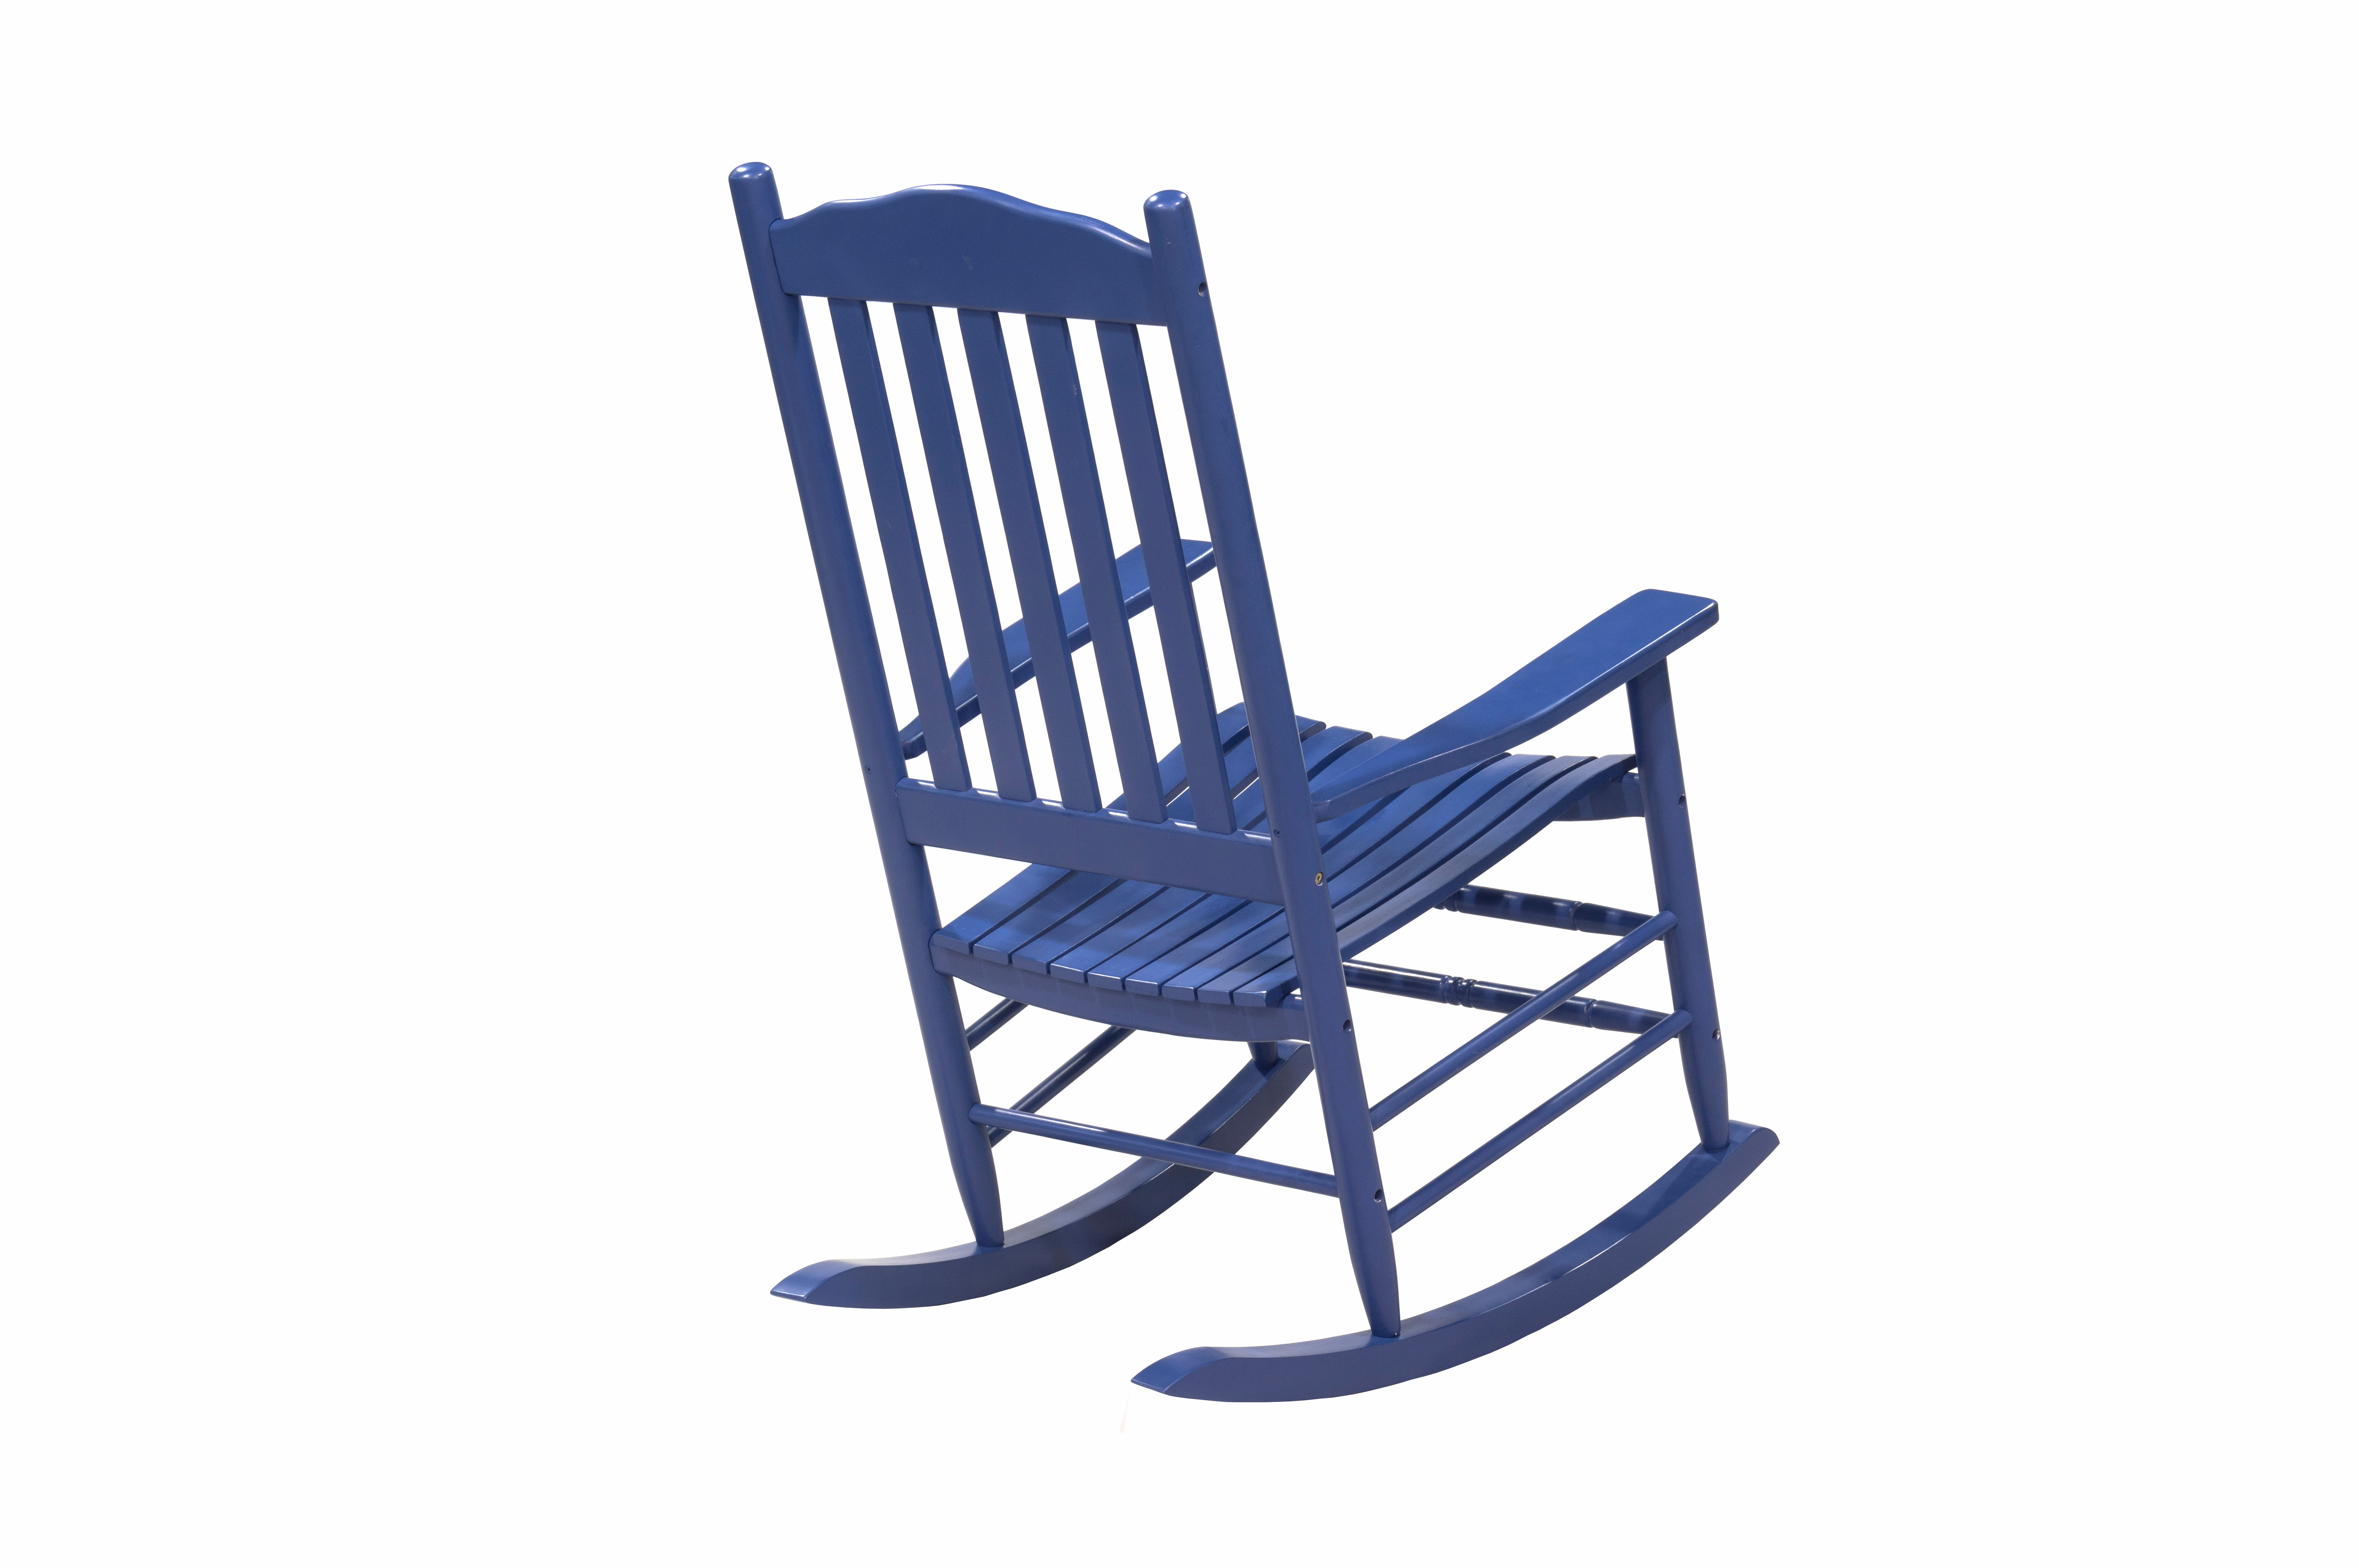 Outdoor Patio Garden Furniture 3-Piece Wood Porch Rocking Chair Set, Weather Resistant Finish,2 Rocking Chairs and 1 Side Table-Blue - image 3 of 11